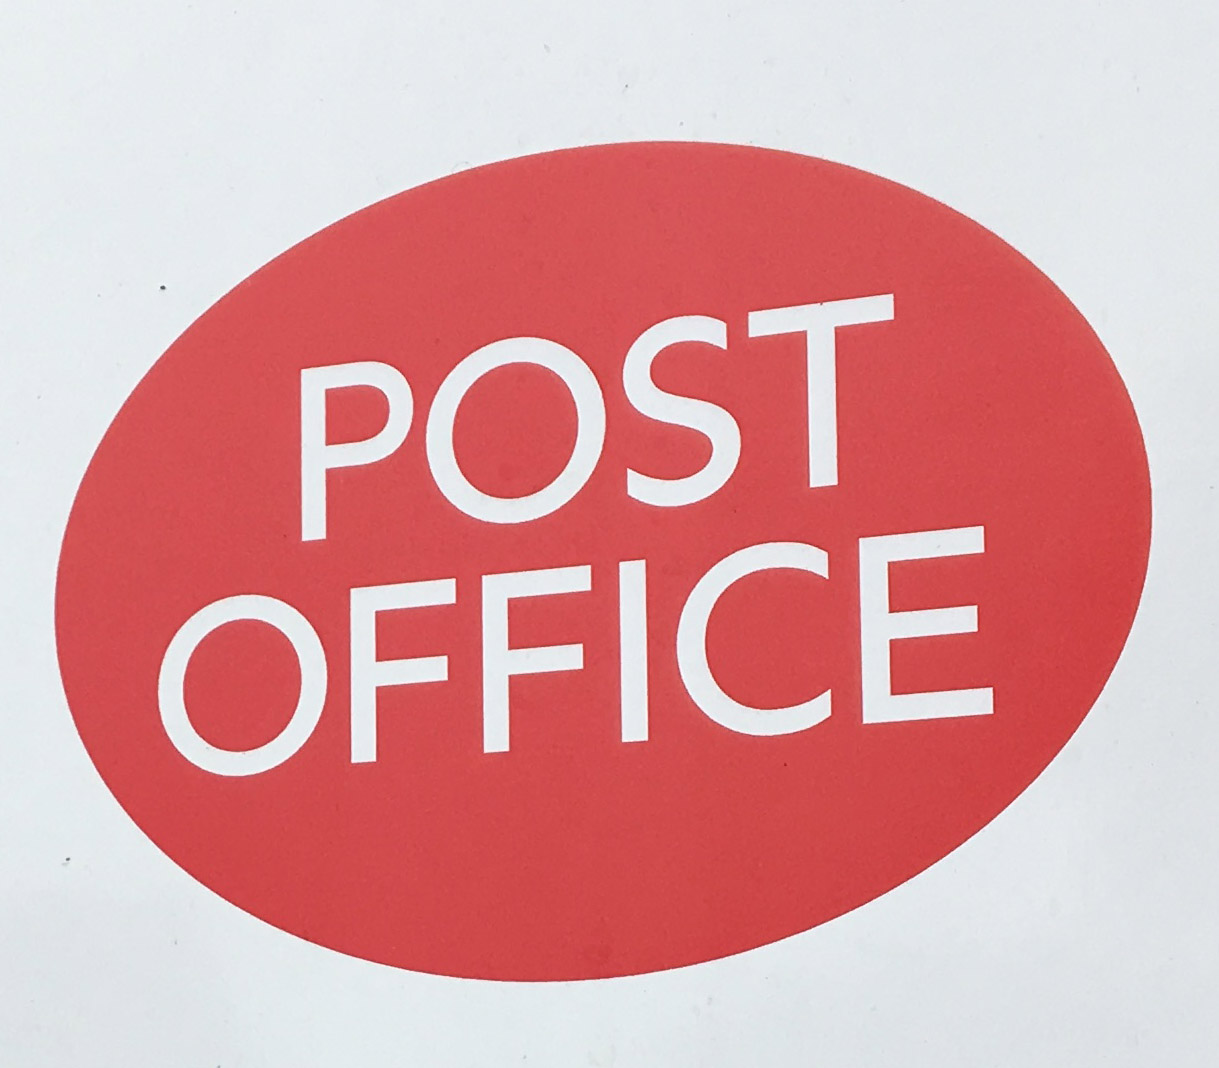 https://www.eastbourneconservatives.org.uk/news/warm-welcome-greeted-postmistress-meads-pop-post-office-opened-business